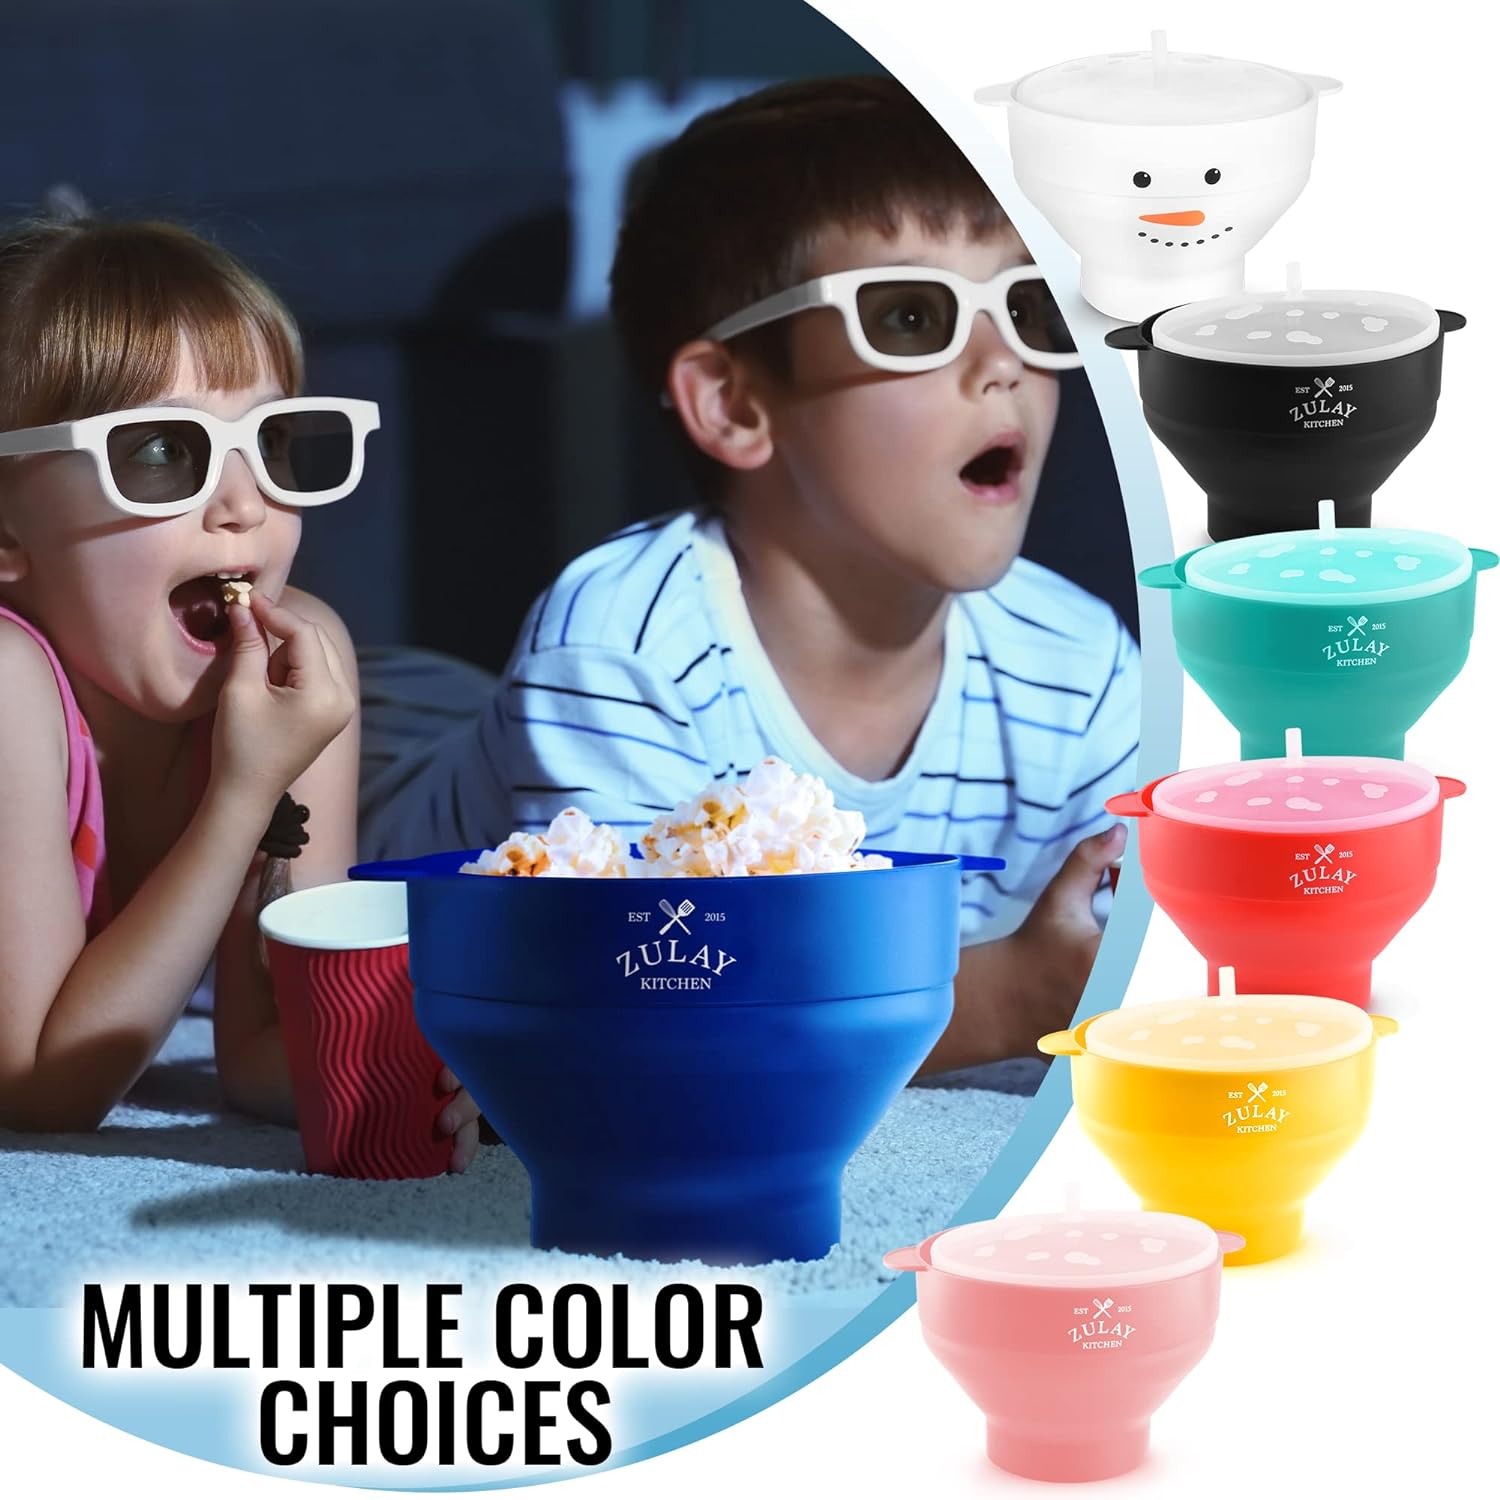 The Original Popco Silicone Microwave Popcorn Popper with Handles, Silicone  Popcorn Maker, Collapsible Bowl Bpa Free and Dishwasher Safe - 15 Colors